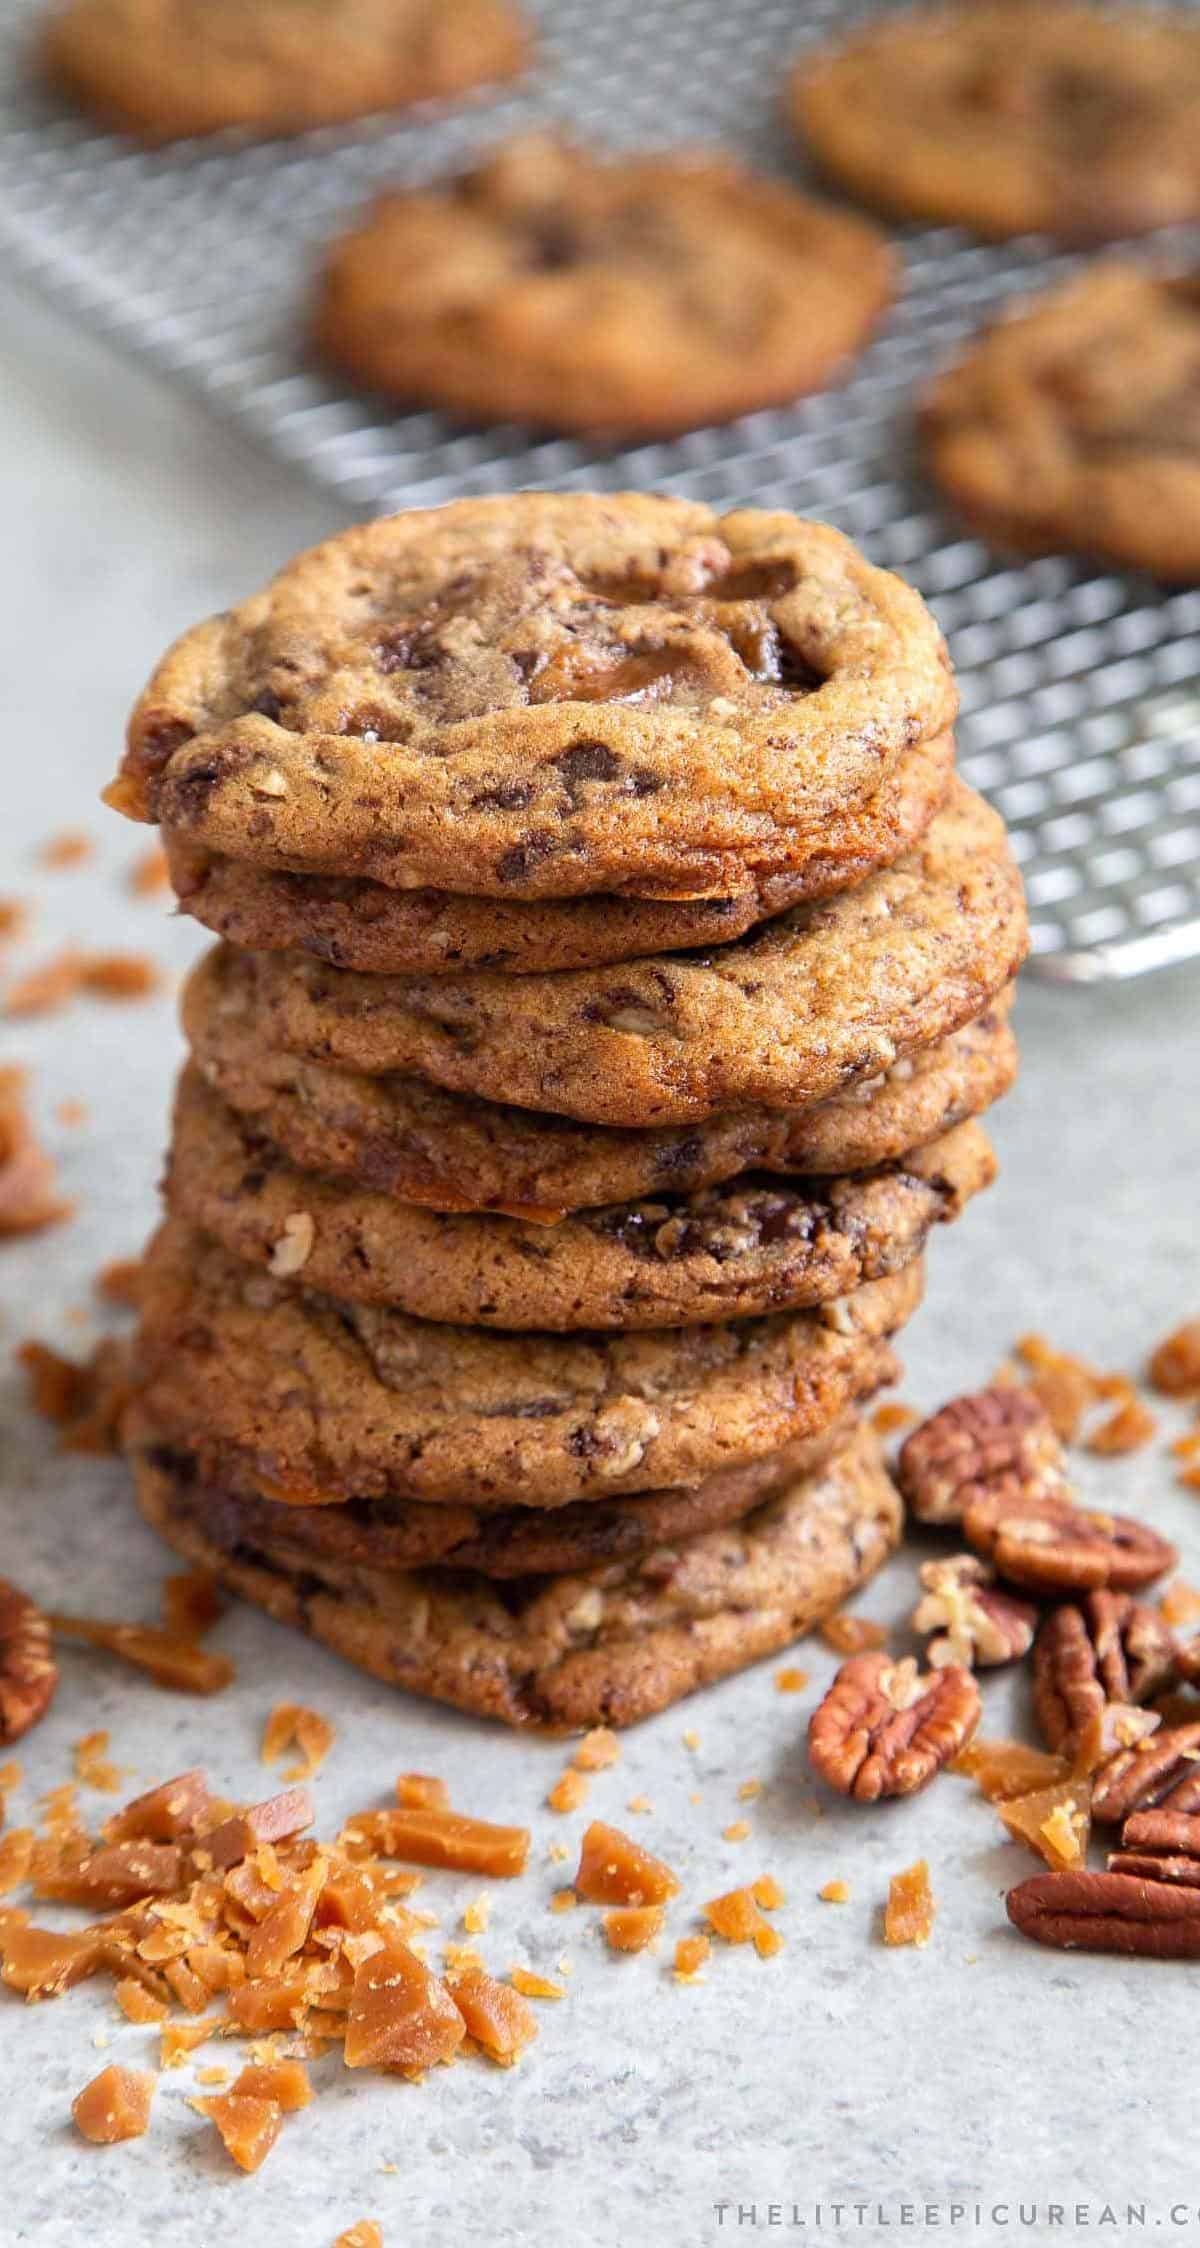  If you're a fan of chocolate chip cookies, you'll love these upgraded ones.